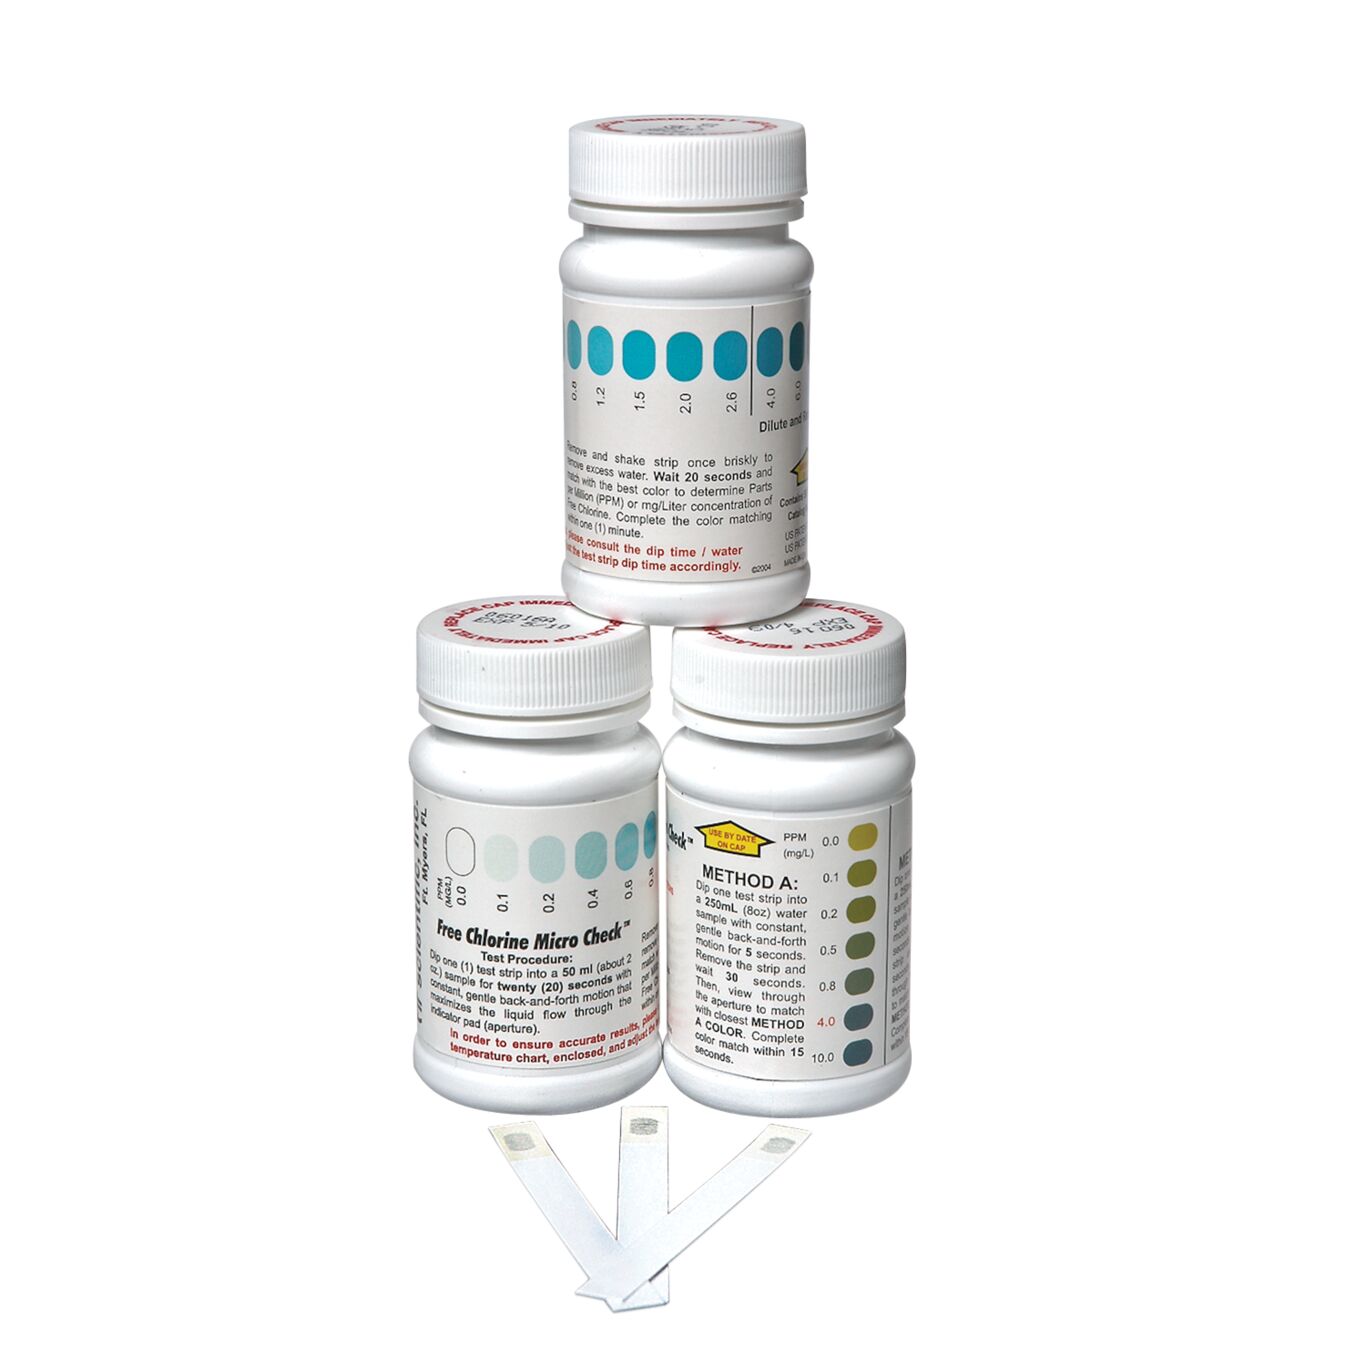 Product Image - Chlorine Micro Check Test Strips